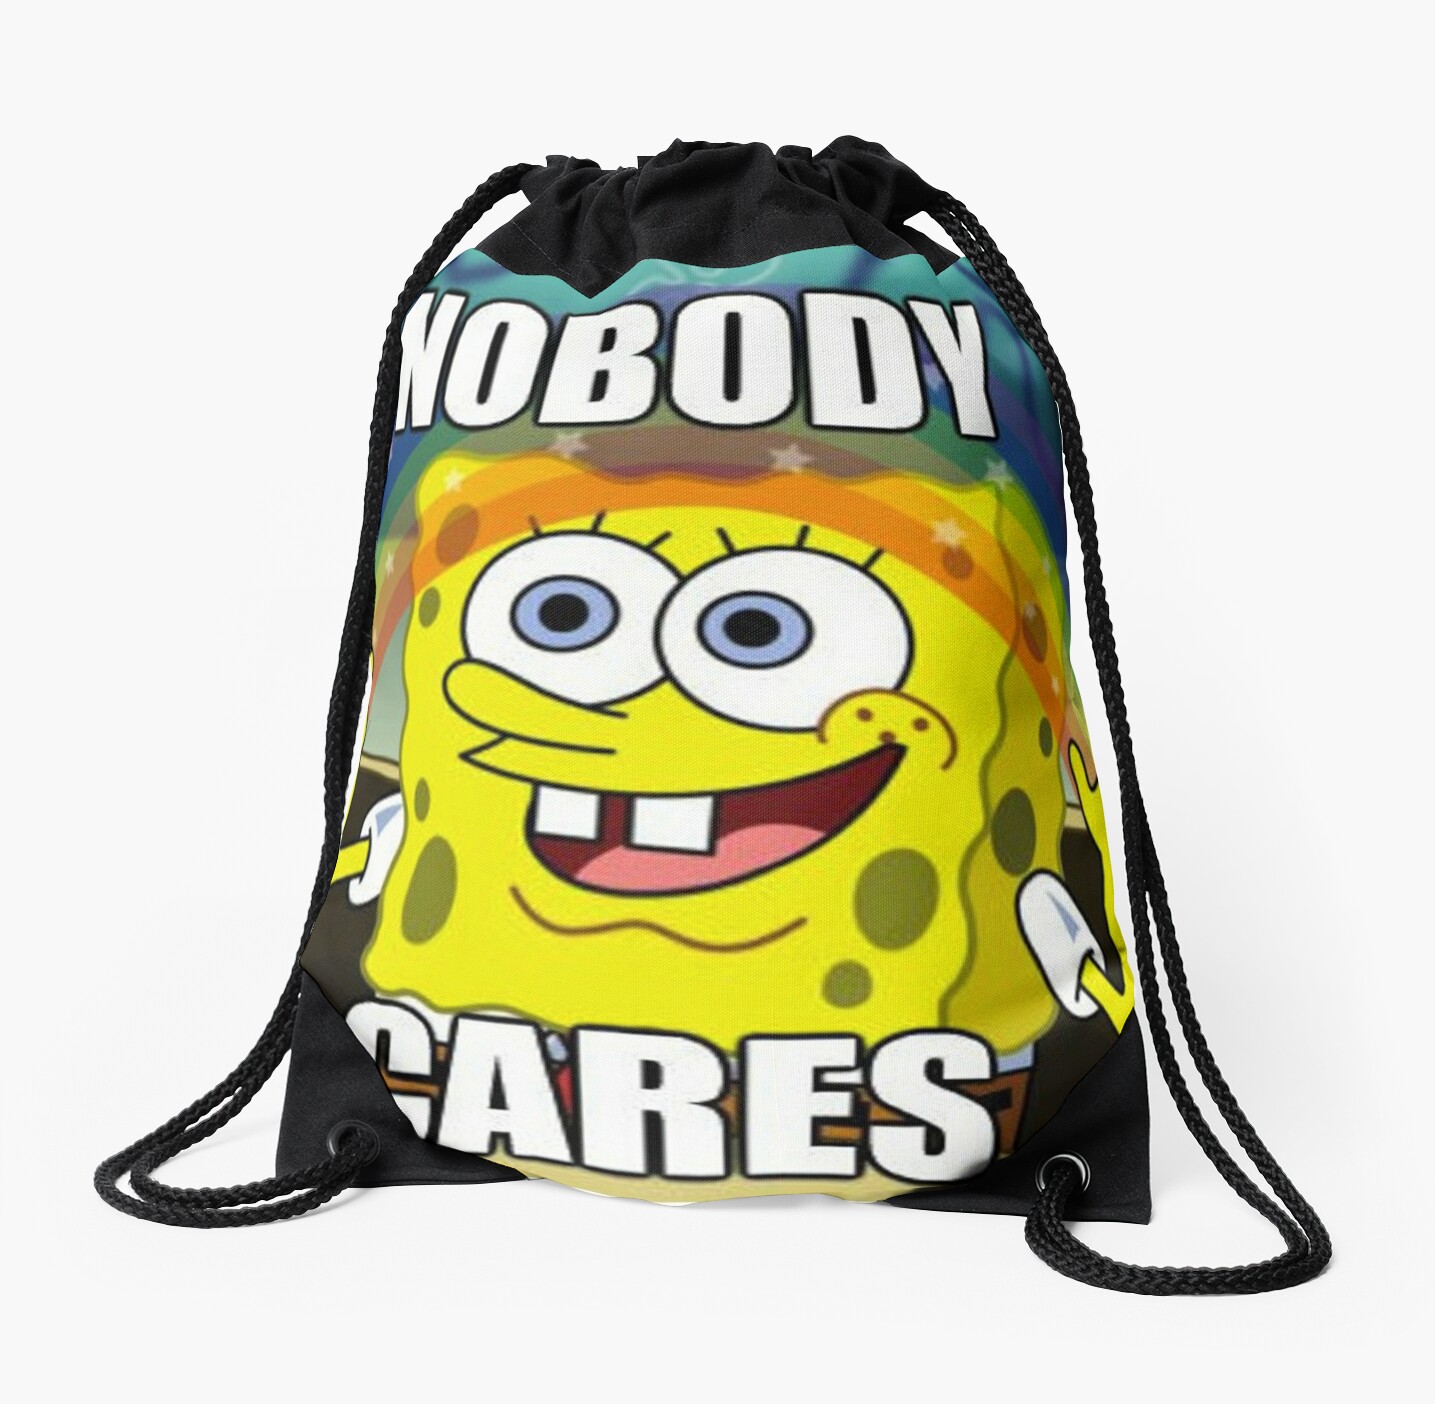 Spongebob Nobody Cares Drawstring Bags By Bellapeace11 Redbubble